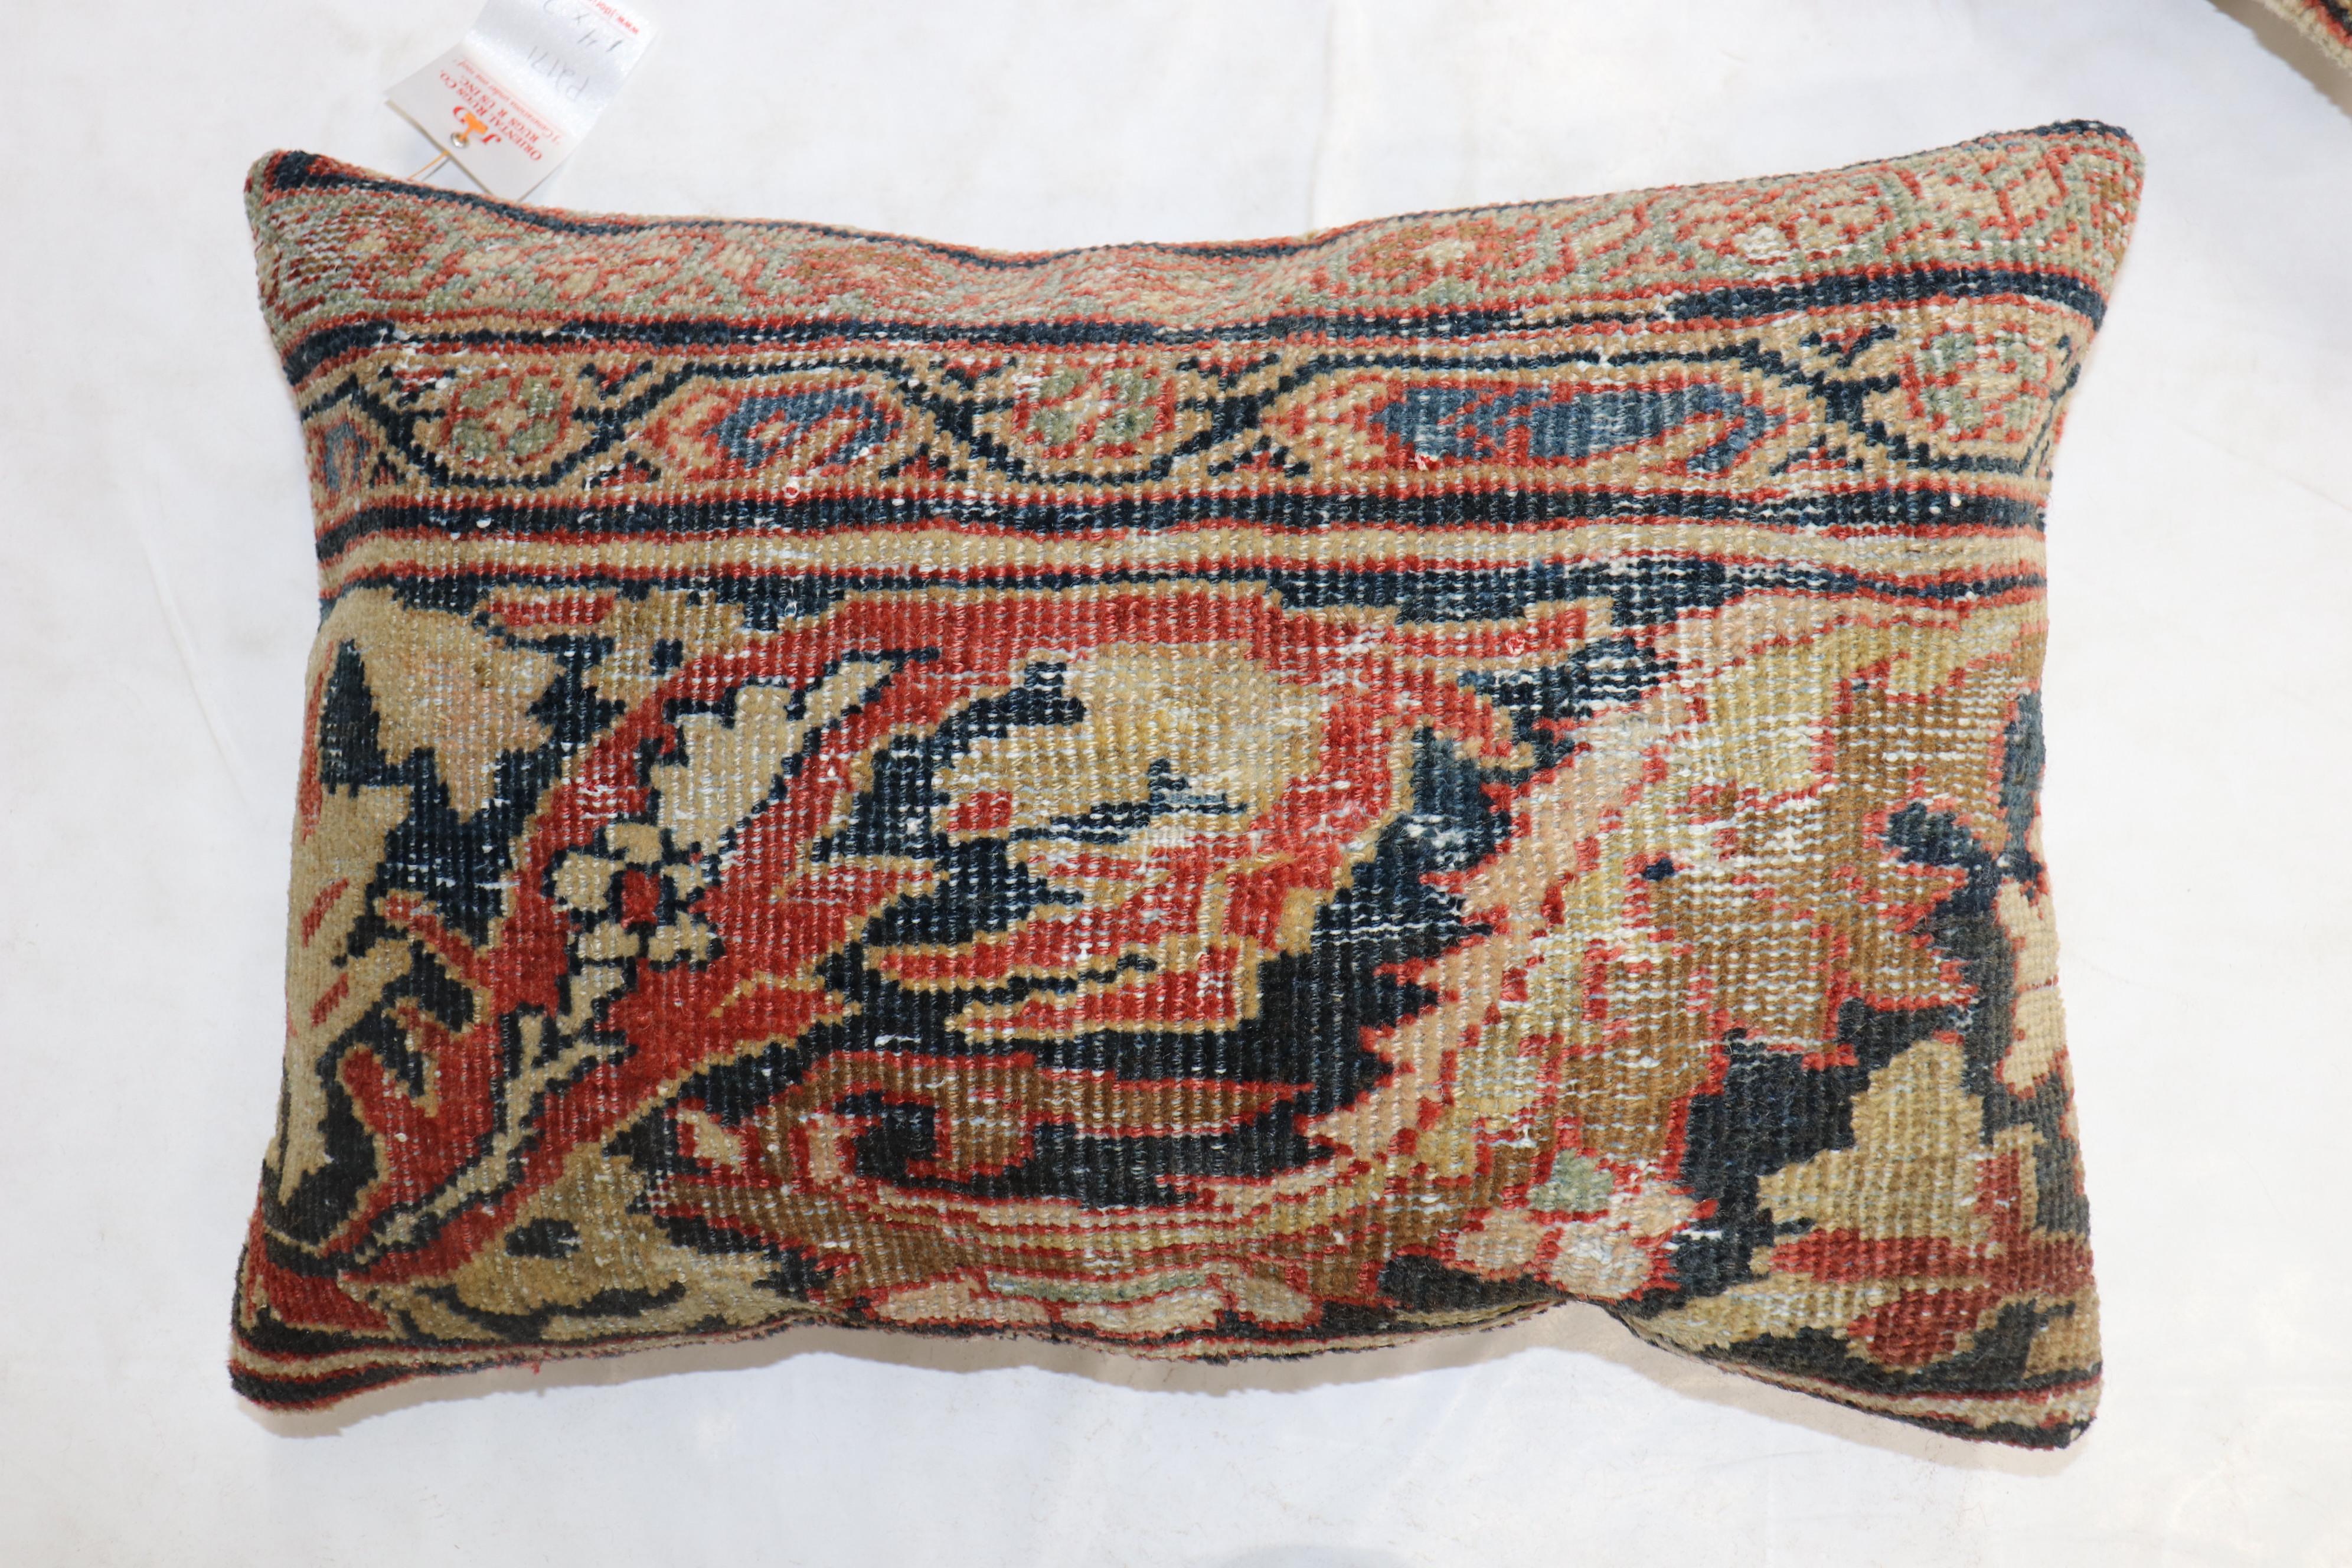 Set of pillows made from a 19th century Traditional Persian Mahal rug.

Measuring: 16